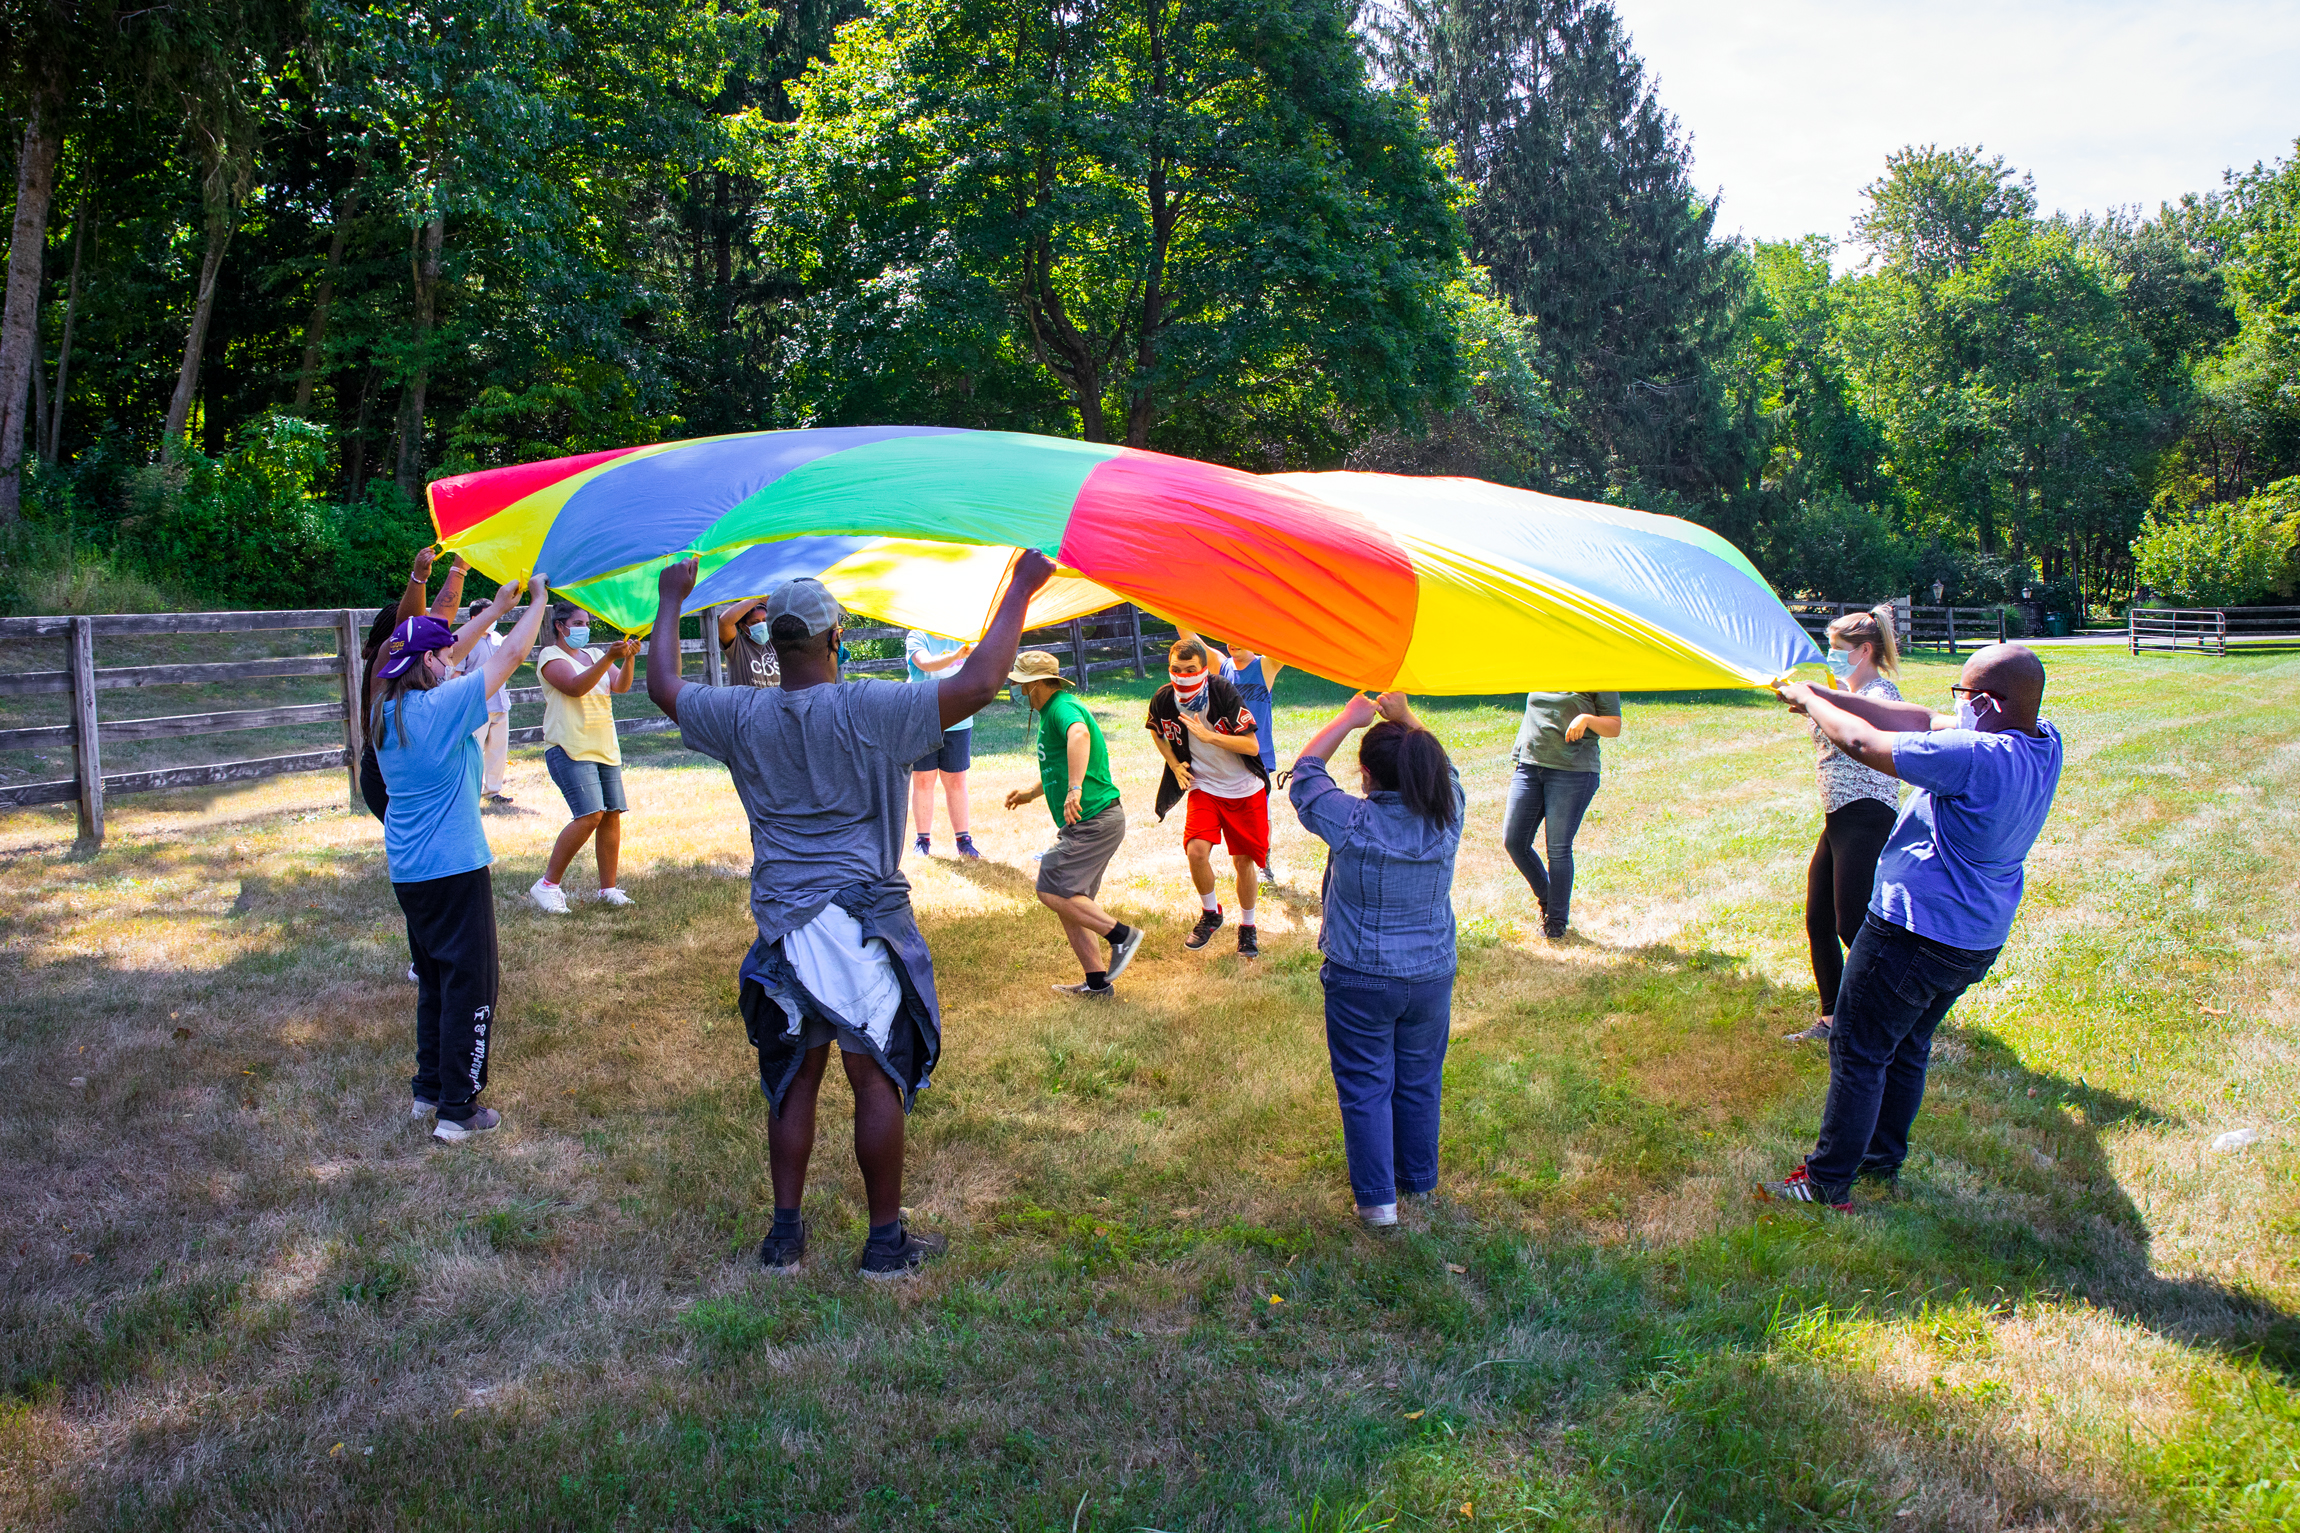 Joining friends under the parachute promotes recreation and fitness on the farm.